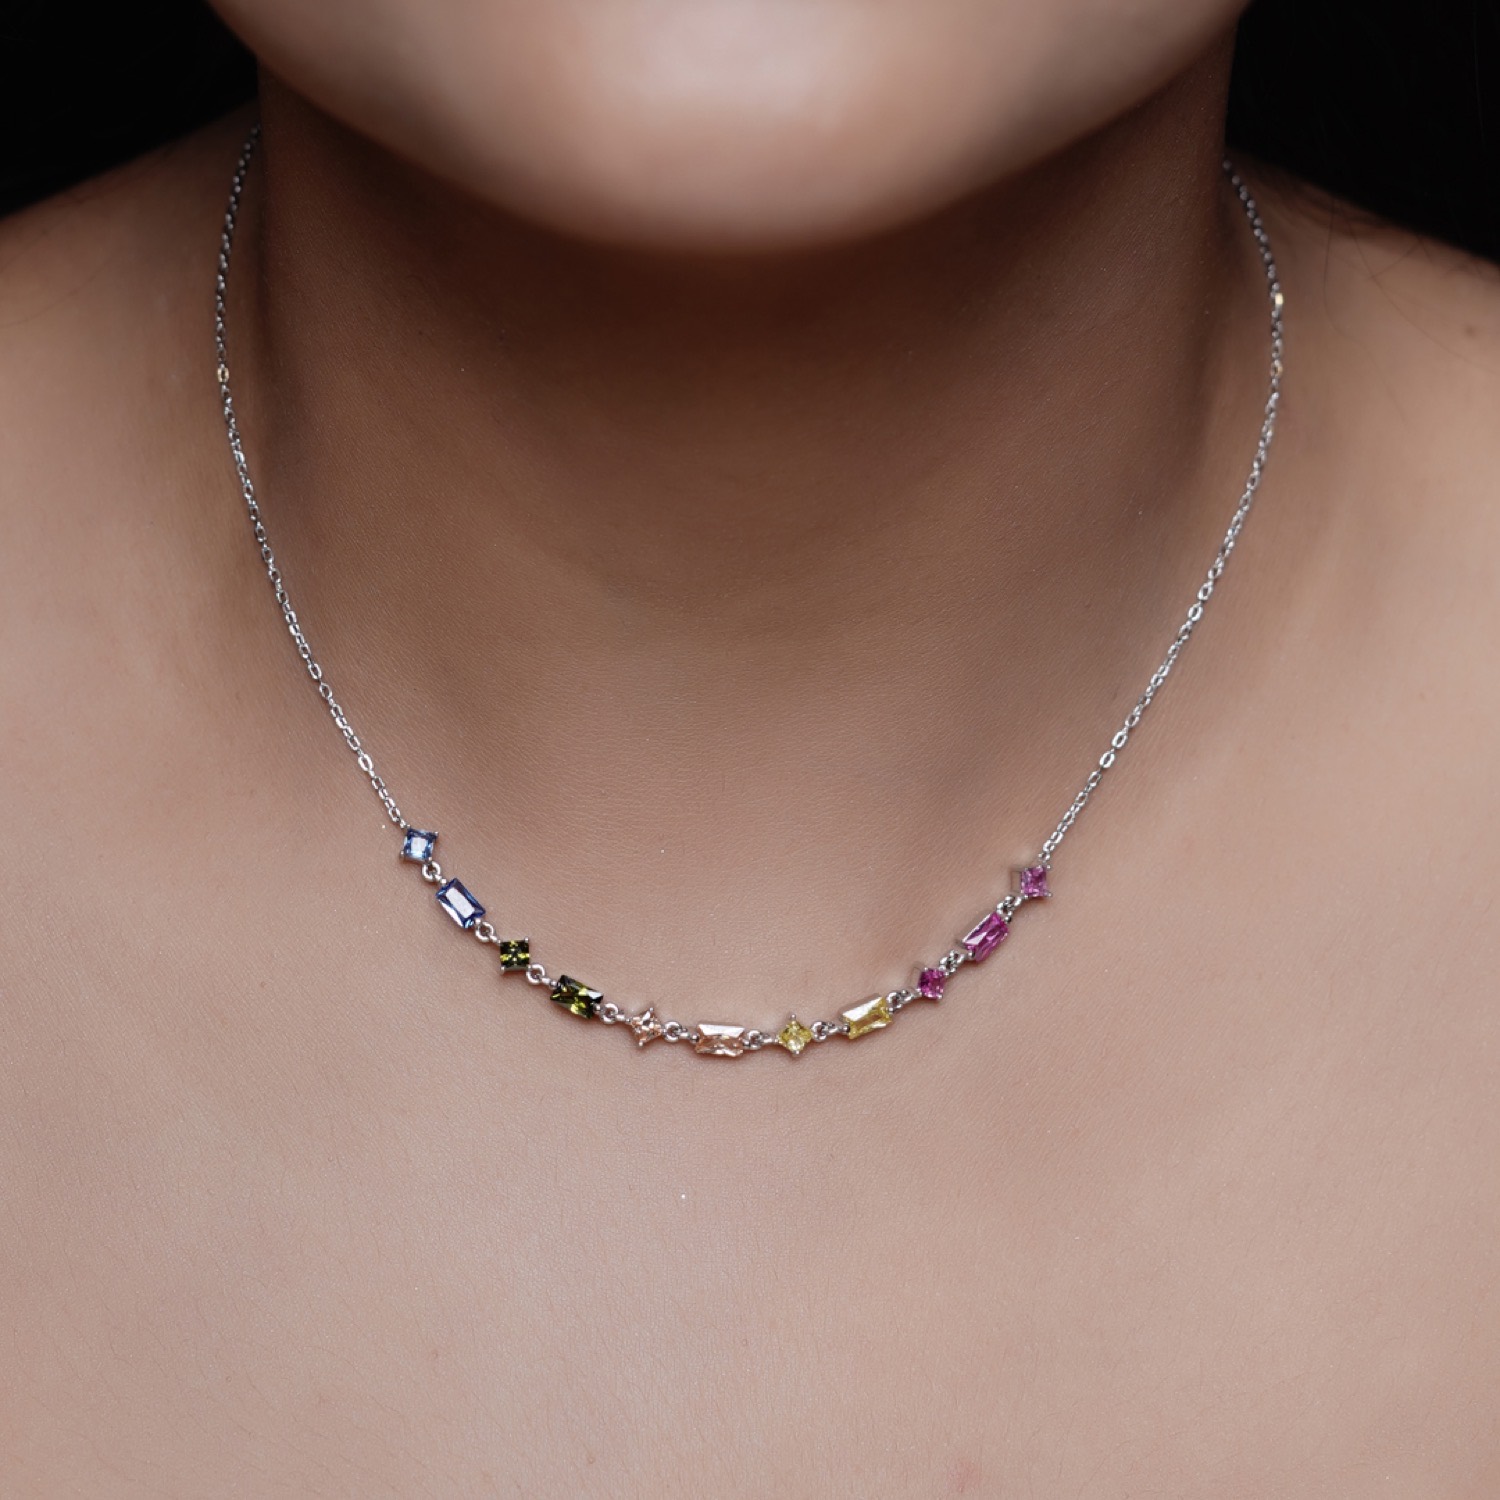 varam_chain_102022_baugette_and_cubic_cut_multicolor_stone_silver_chain-2